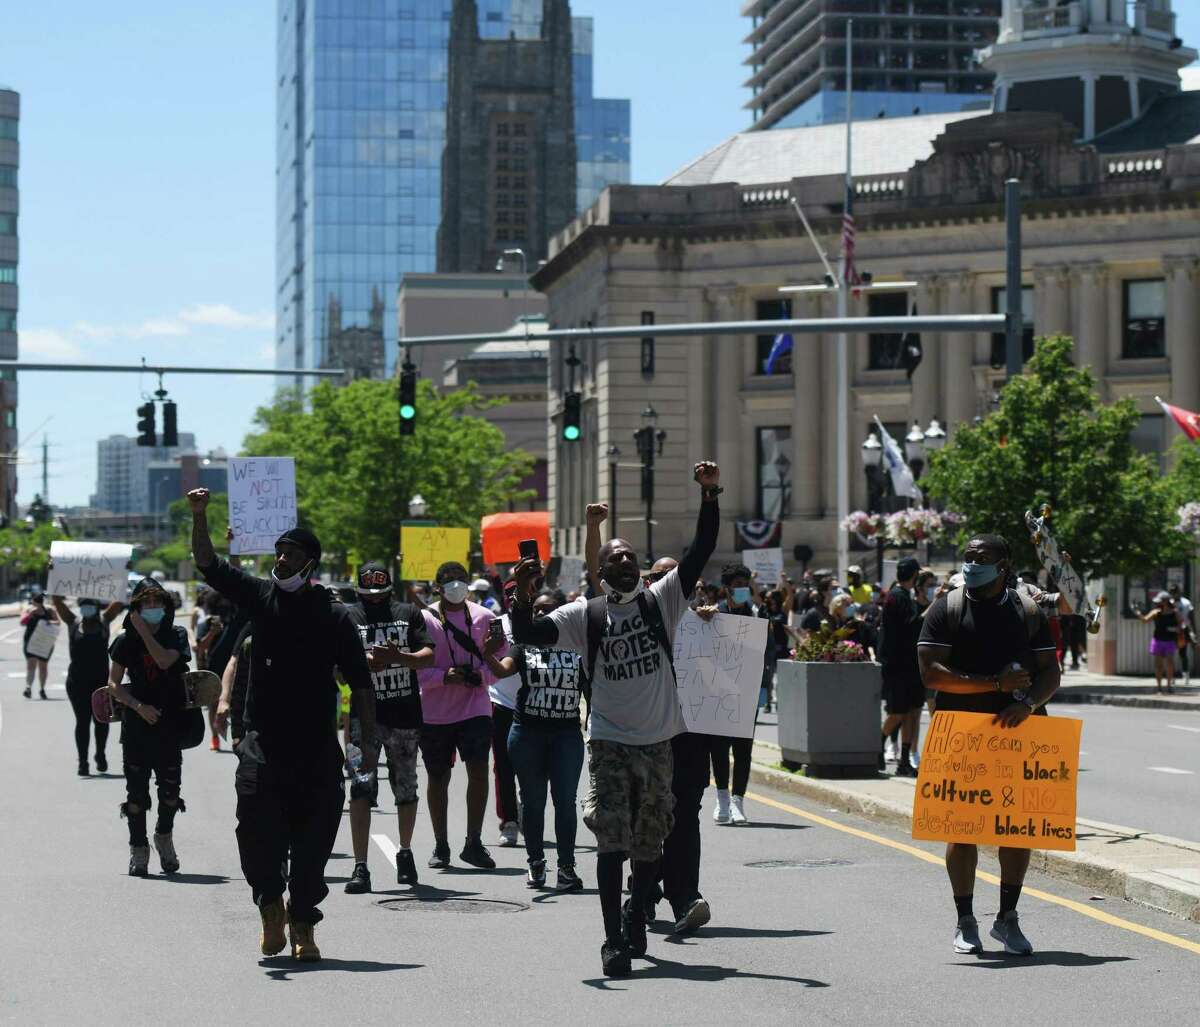 A Black Lives Matter protest in Stamford, Conn. in May 2020.